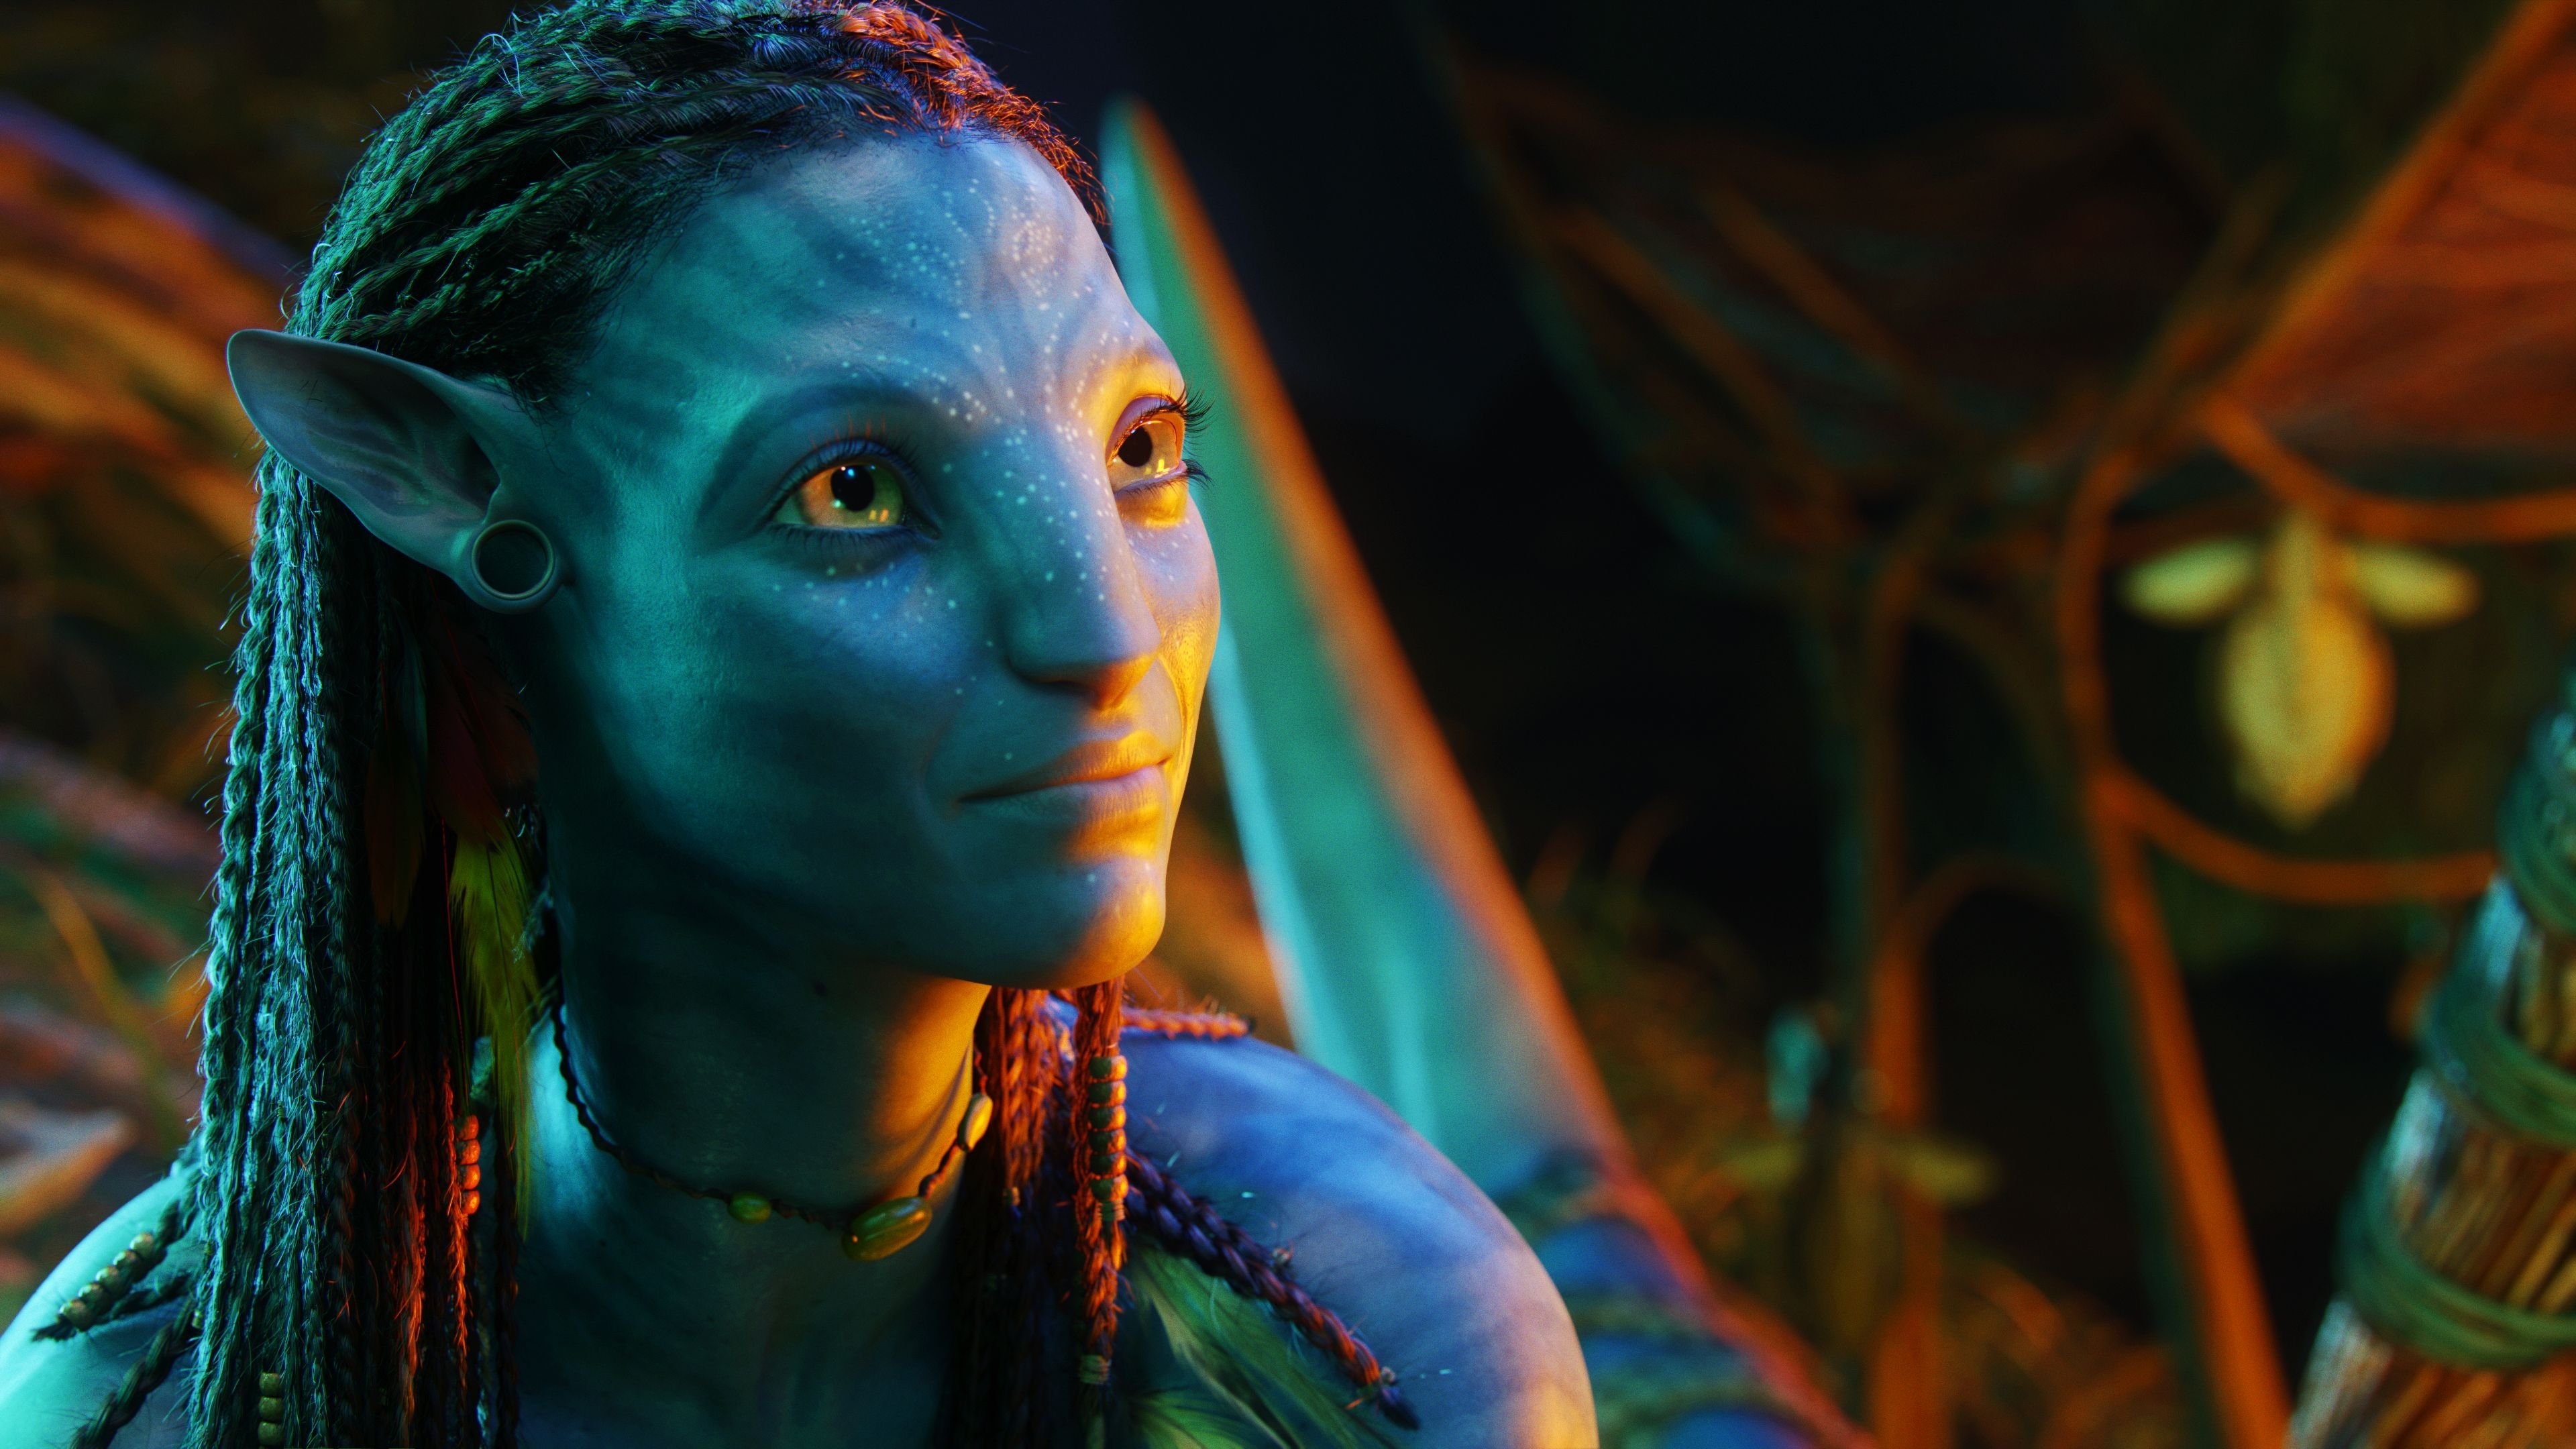 Avatar The Way of Water is a visual delight but the plot lacks punch